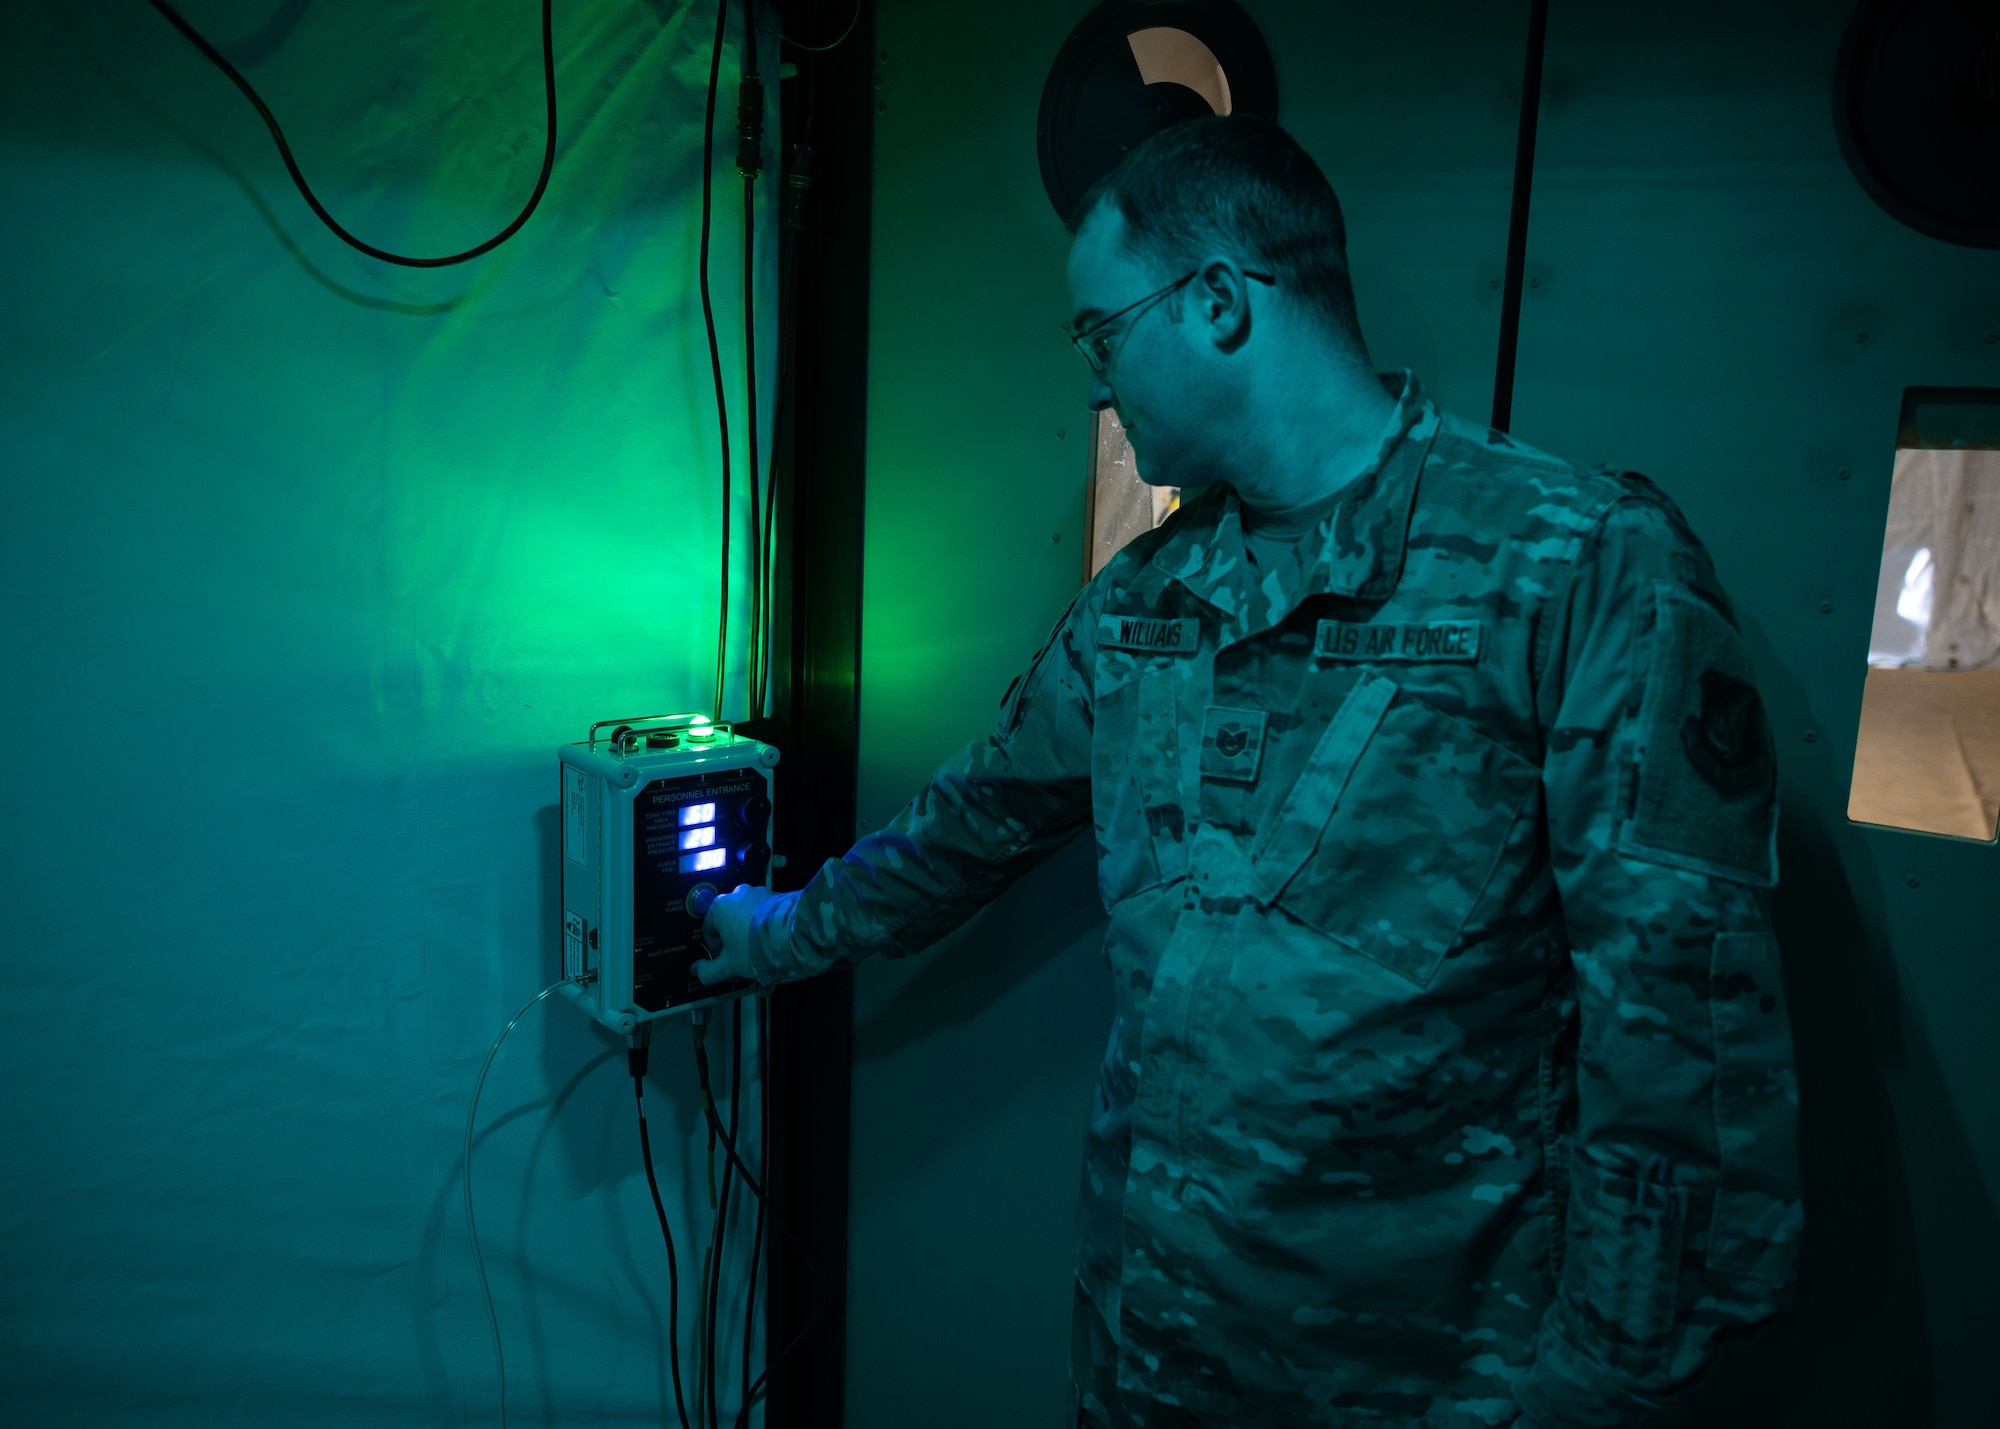 Tech. Sgt. Jordan Williams, 354th Medical Group NCO in charge of medical materiel from Eielson Air Force Base, Alaska, adjusts a dial on the toxic free area (TFA) control module of a chemical protection system at Kunsan Air Base, Republic of Korea, Jan. 20, 2023. The device regulates the air pressure in the multi-functional entrance, purging any toxic chemicals in the room. (U.S. Air Force photo by Senior Airman Akeem K. Campbell)